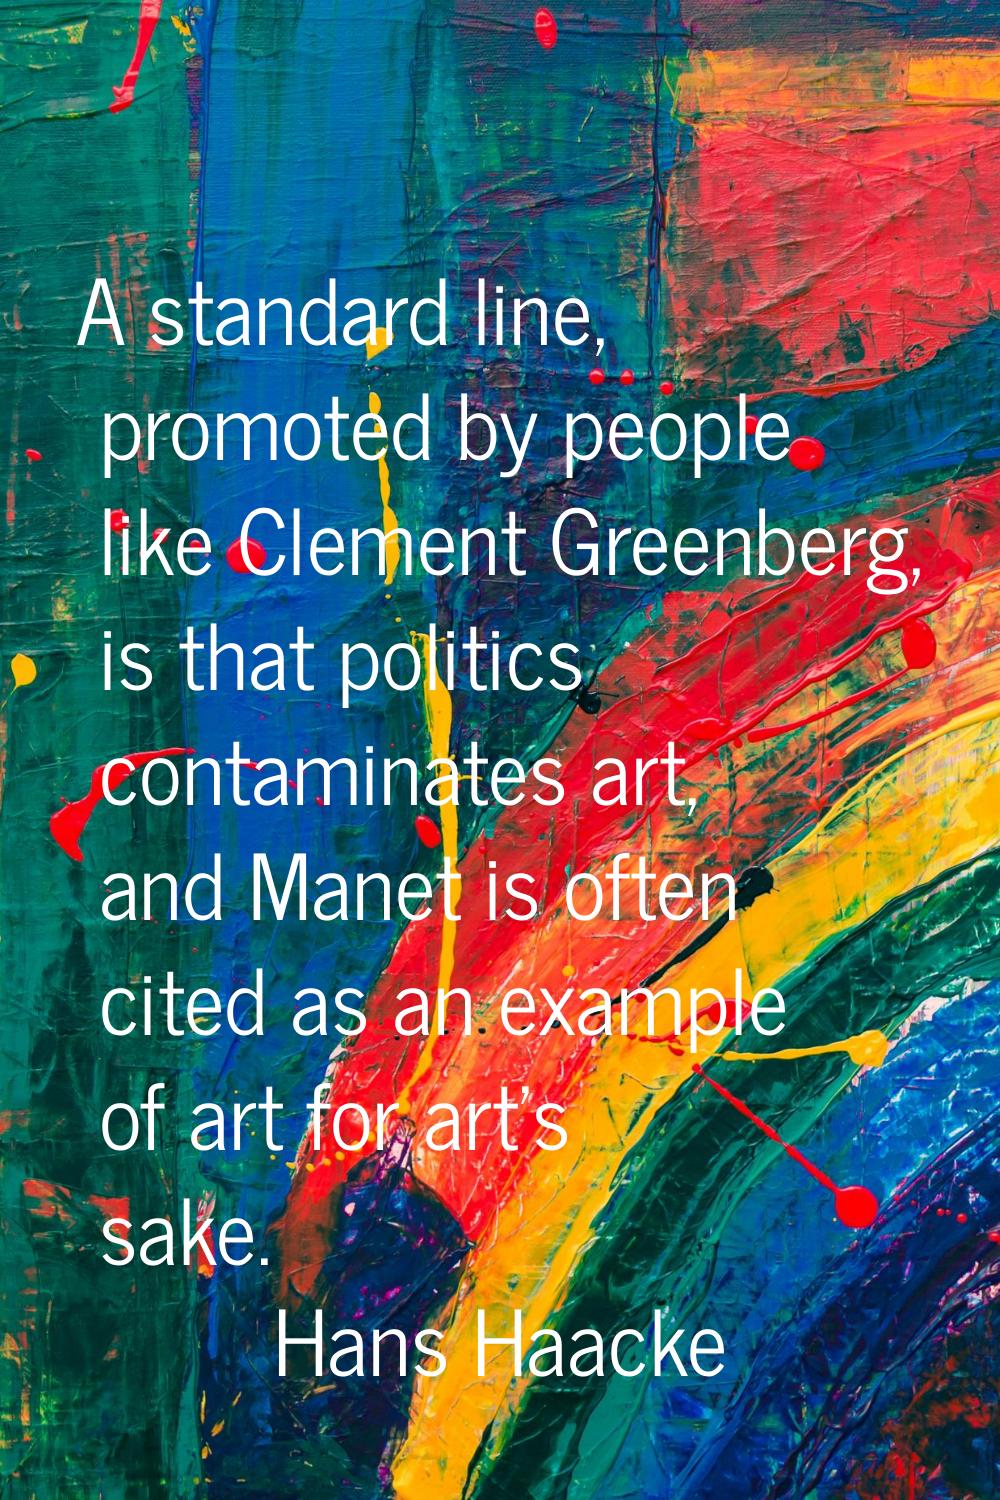 A standard line, promoted by people like Clement Greenberg, is that politics contaminates art, and 